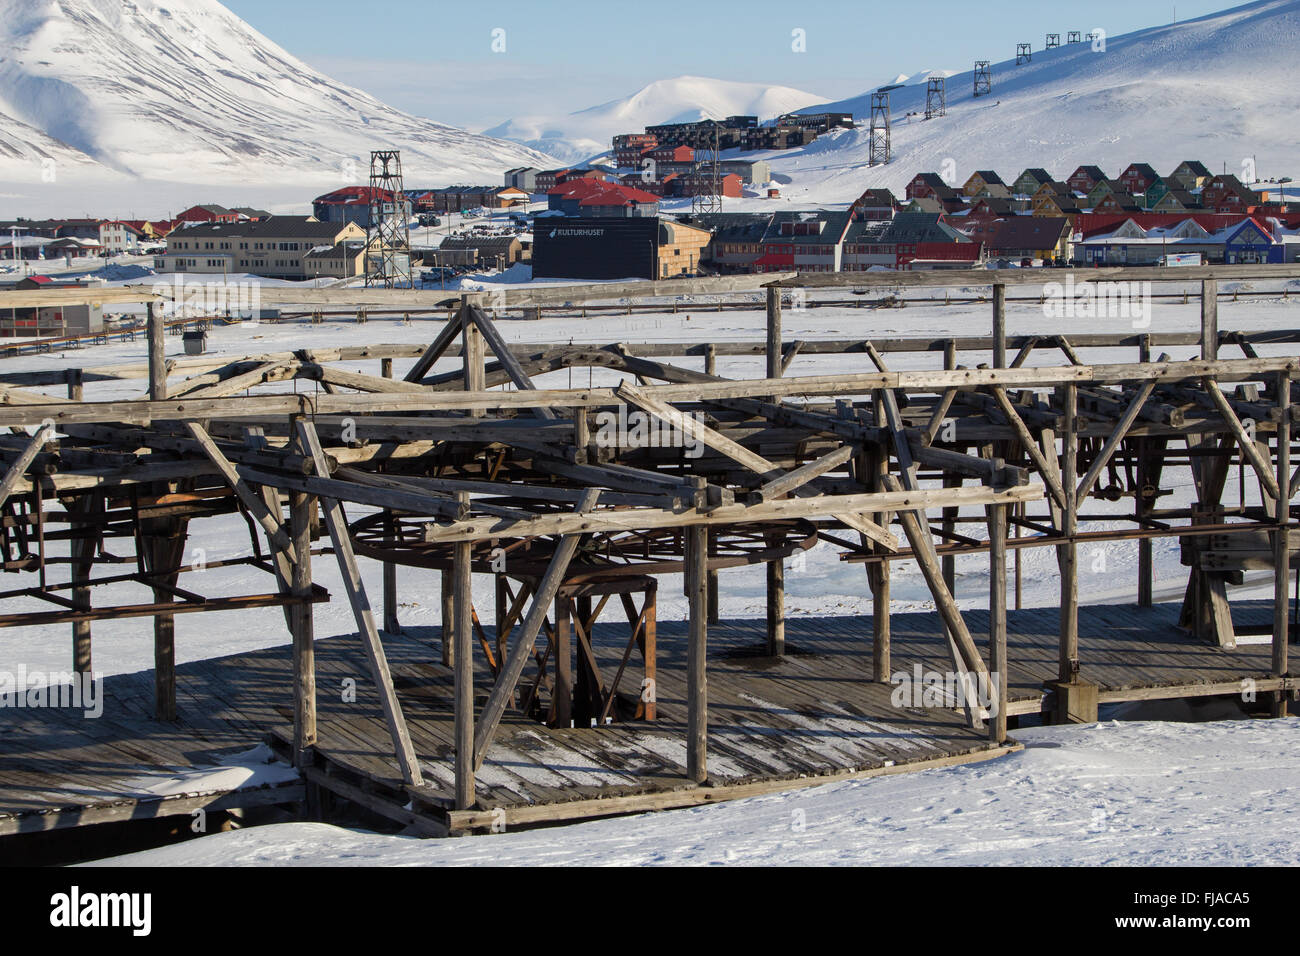 Mechanisms of old system to transport coal in Longyearbyen, Spitsbergen (Svalbard). Norway. Currently non-working. Stock Photo